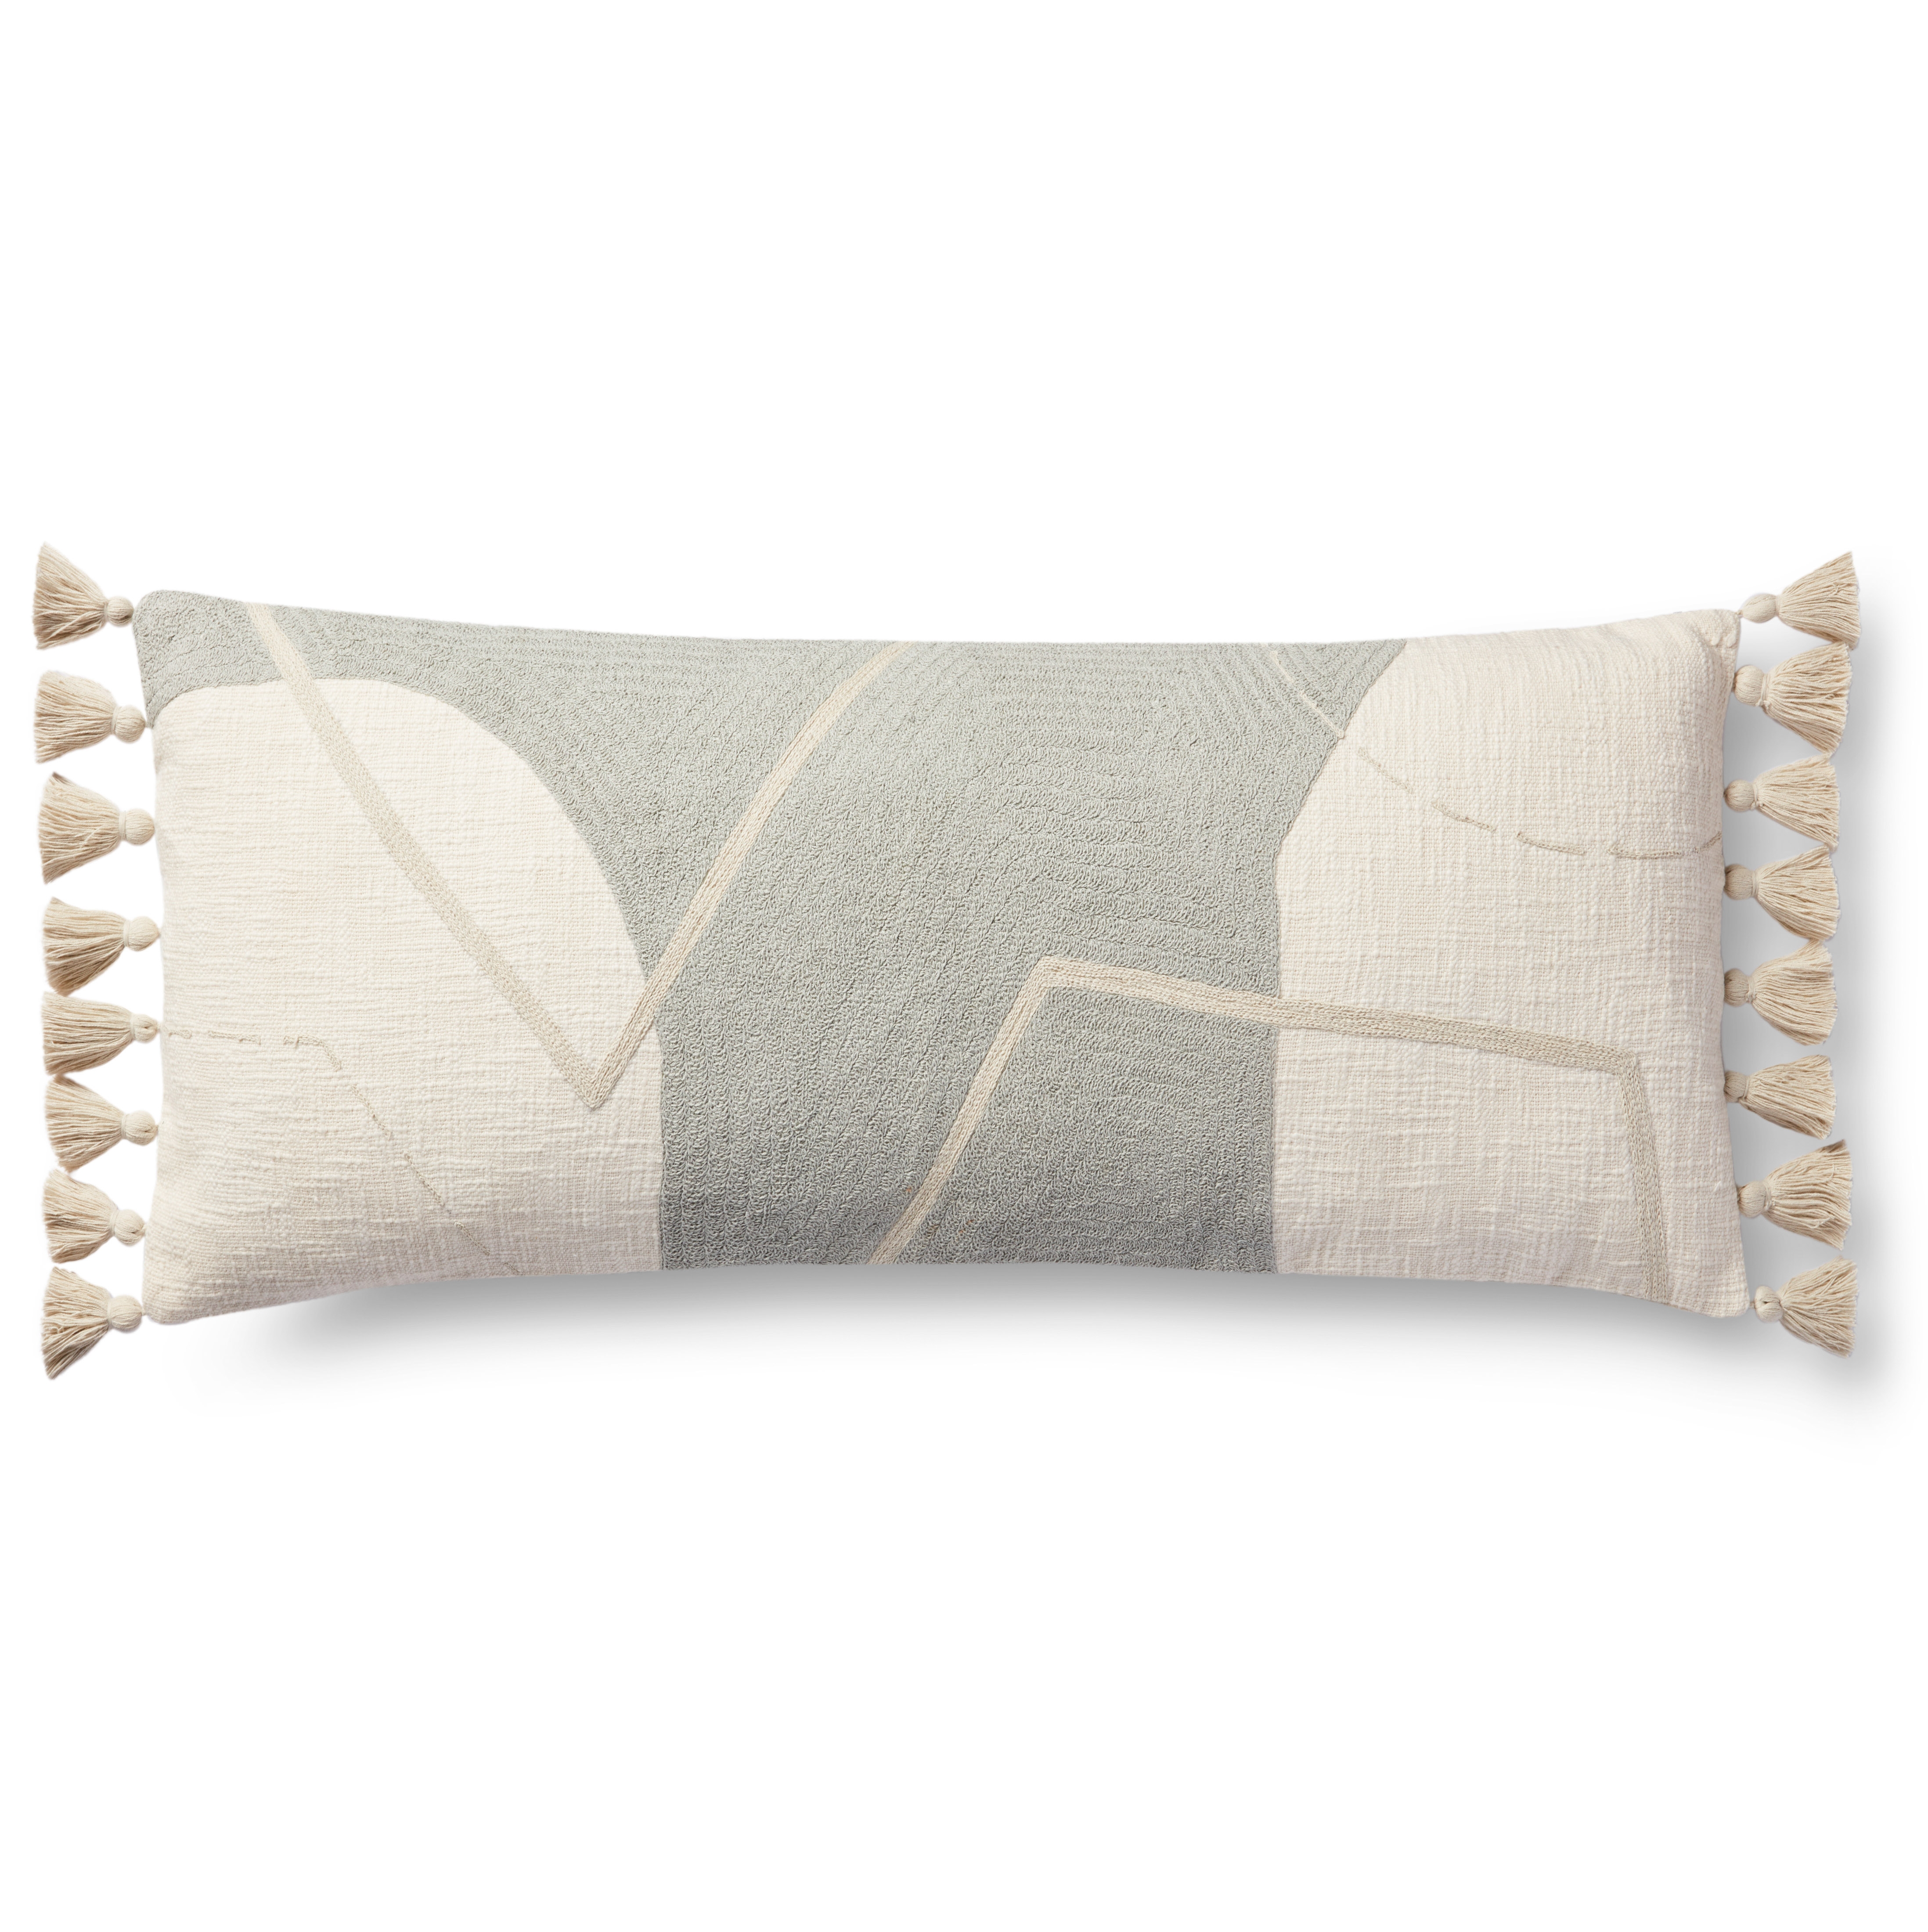 PILLOWS P0942 GREY / MULTI 13" x 35" Cover Only - Image 0